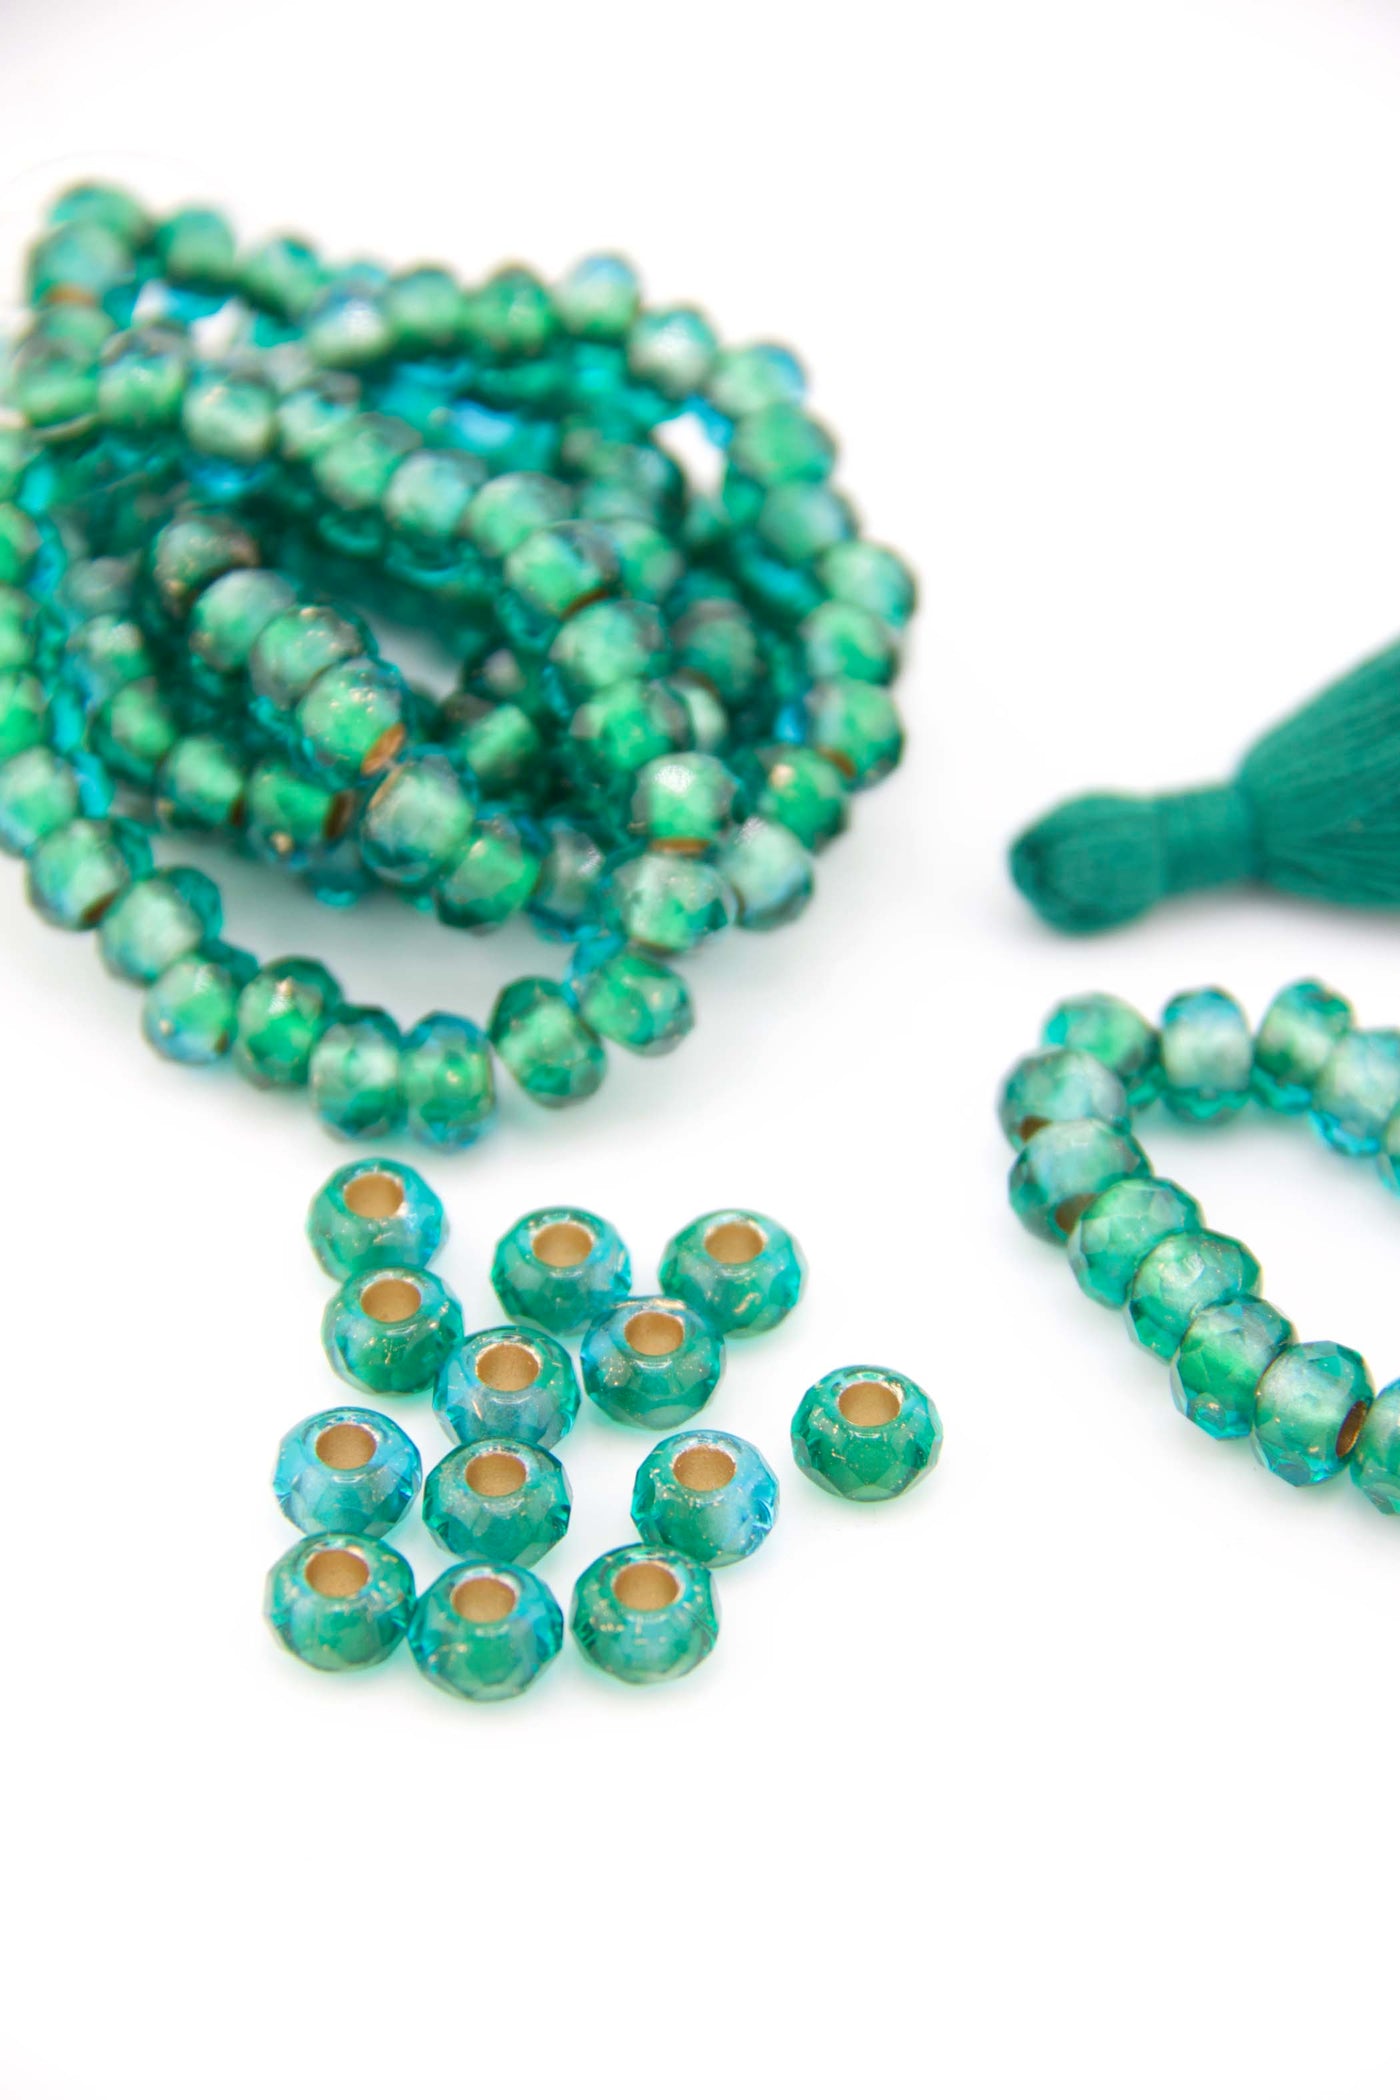 Teal Czech Glass with Gold Lining, 9x6mm, 25 Large Hole Beads